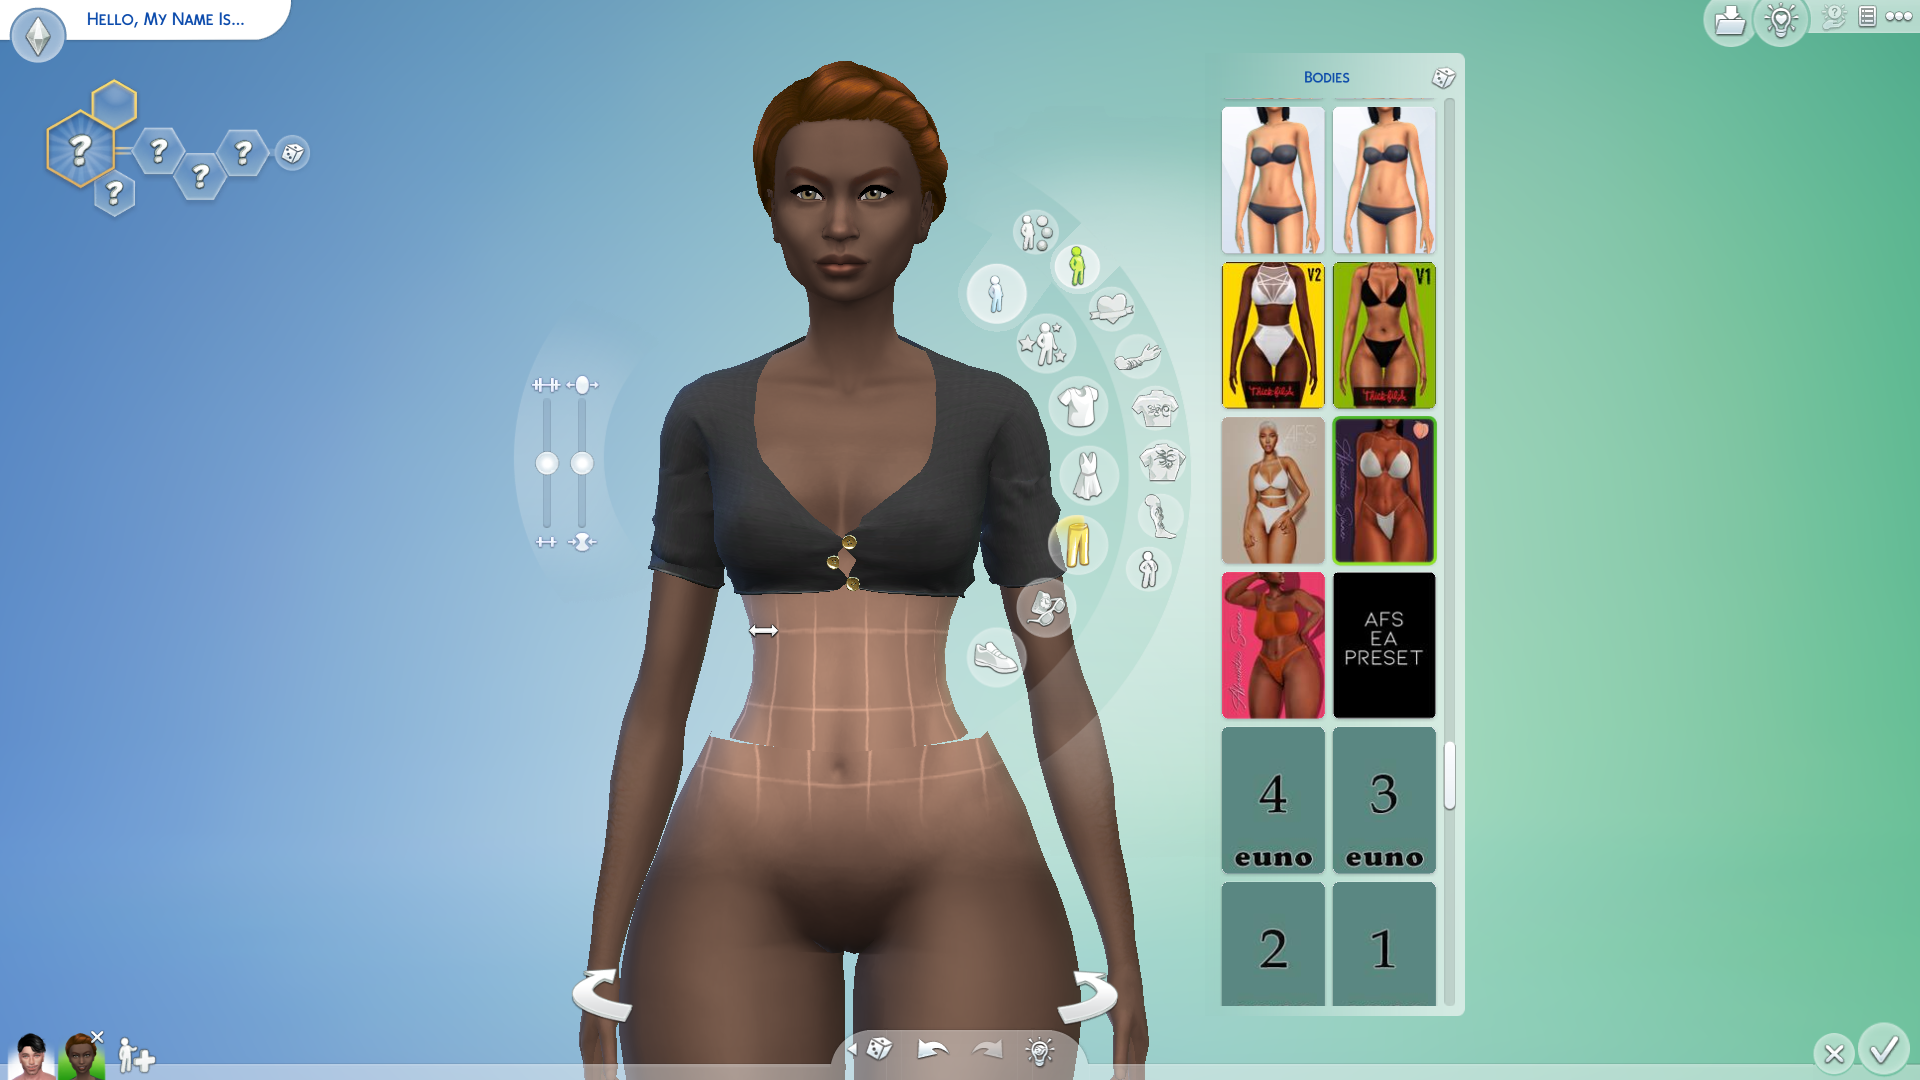 Sims 4 Body Sliders  sims 4, sims, sims 4 body mods